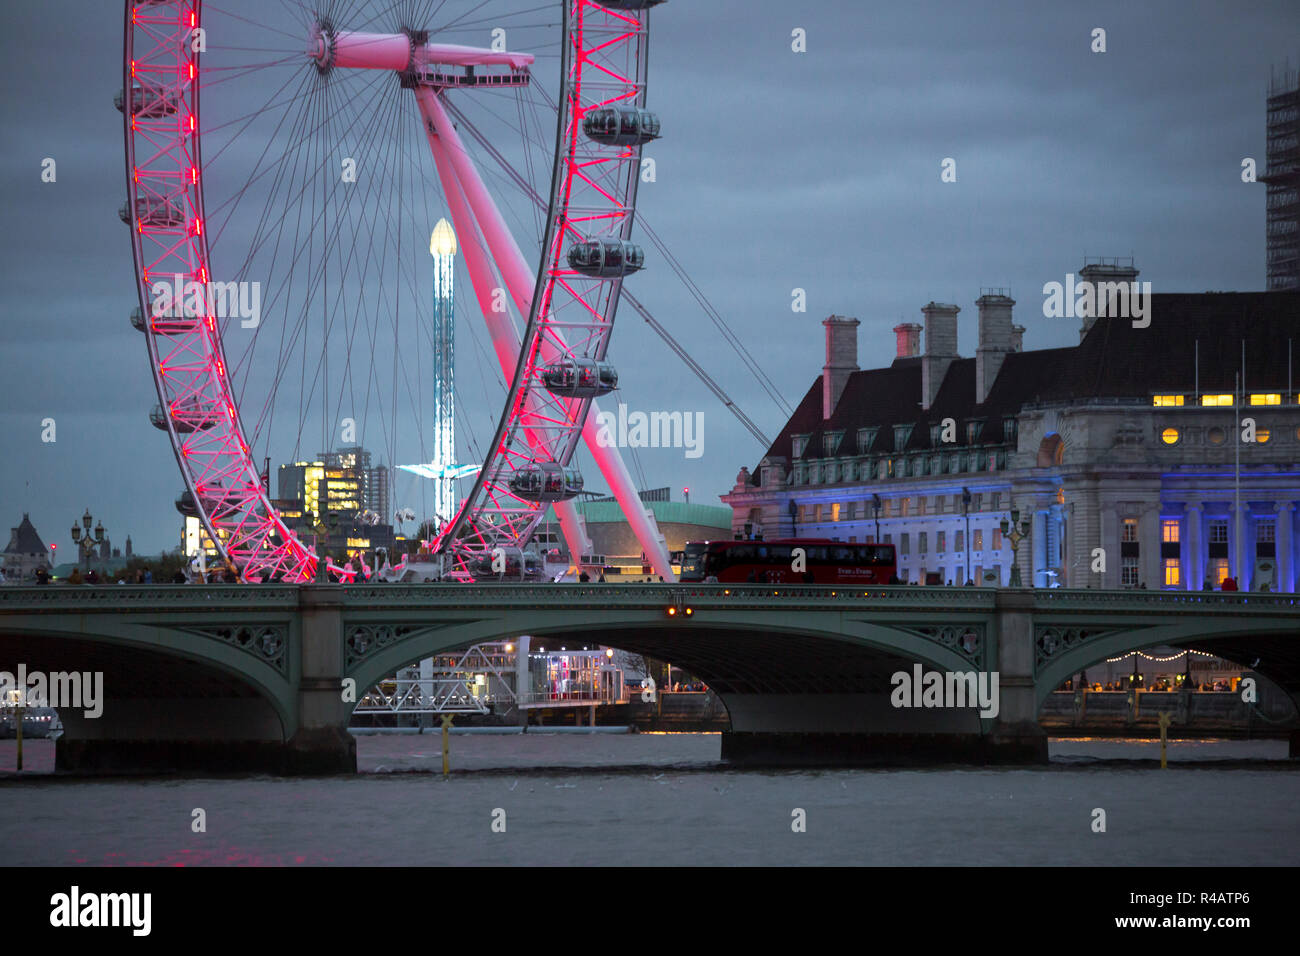 View of the Lodoon eye wheel on the banks of the River Thames in London illumintaed by red lights and set against a deep blue twilight sky with cloud in the autumn evening. Stock Photo